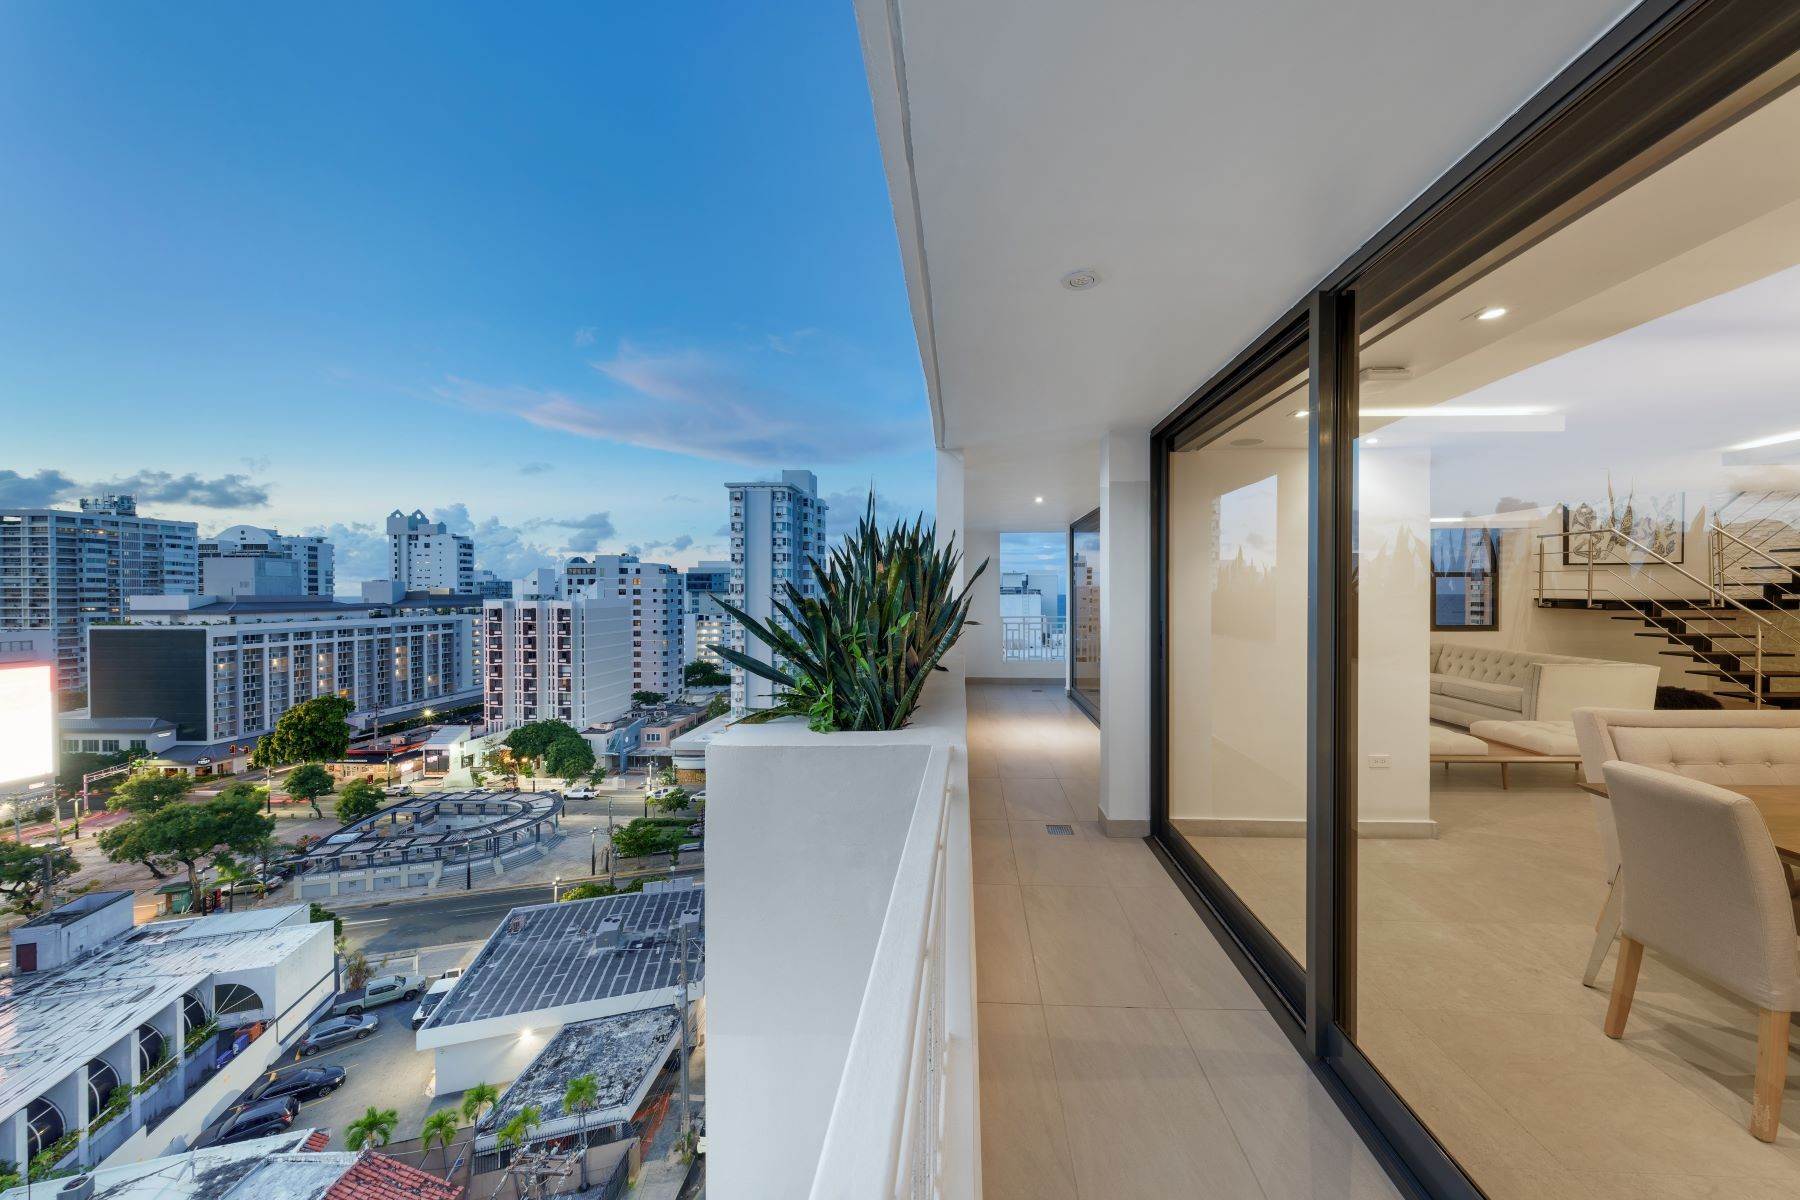 22. Condominiums for Sale at Elevated Urban Living: A Modern Luxury Penthouse in the Heart of the City 57 Washington St., PH 12 San Juan, 00907 Puerto Rico